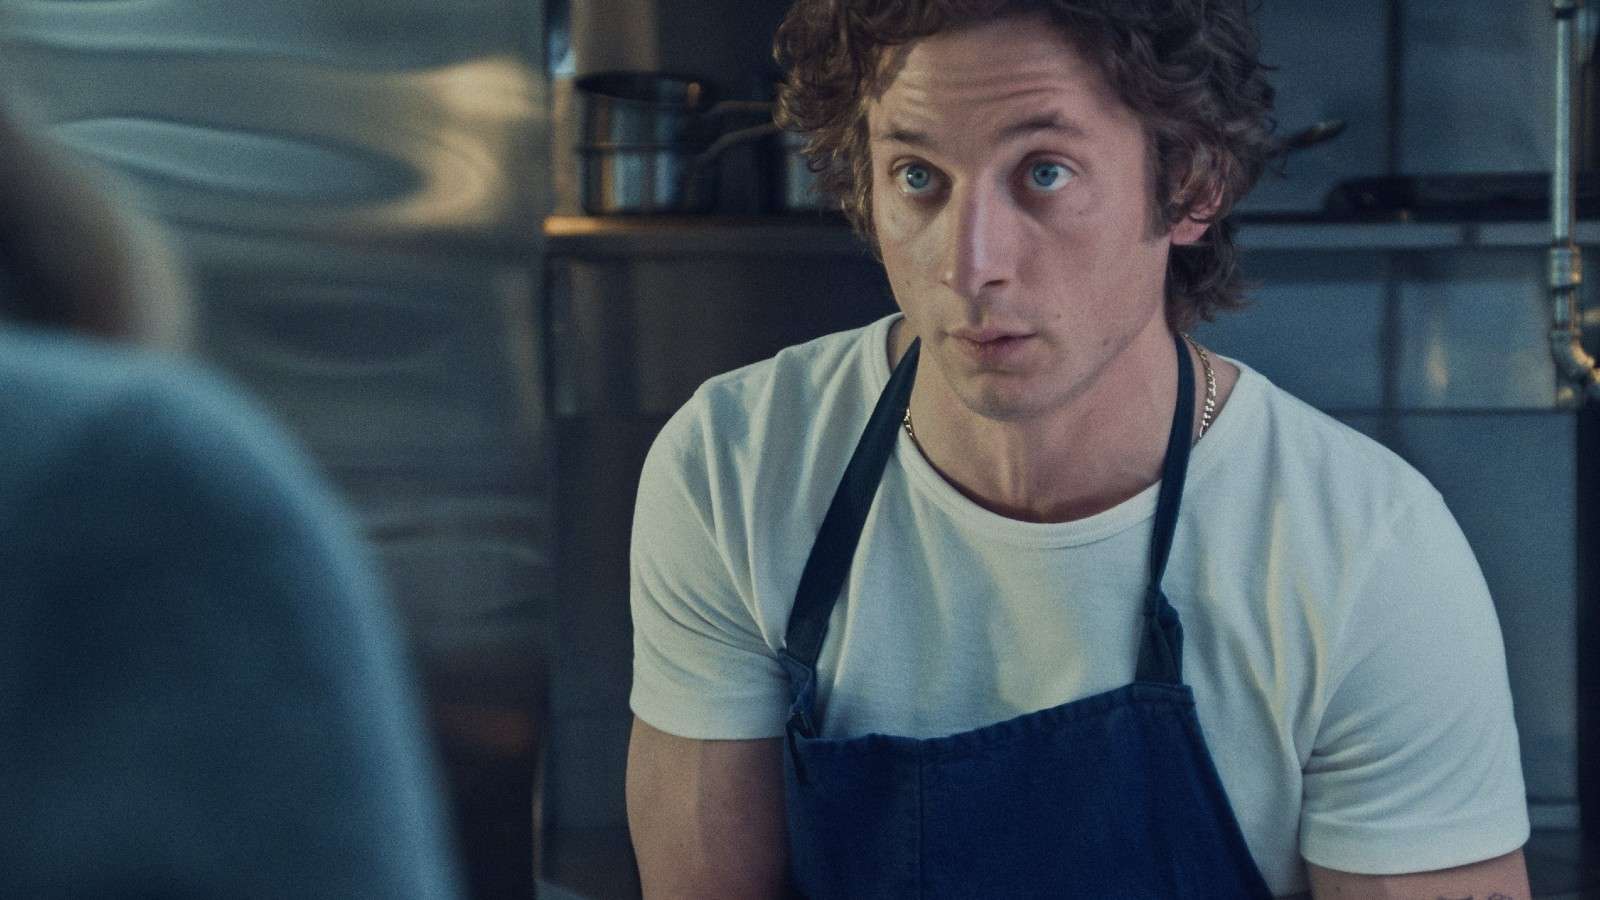 Jeremy Allen White as Carmy sitting in the kitchen in The Bear.